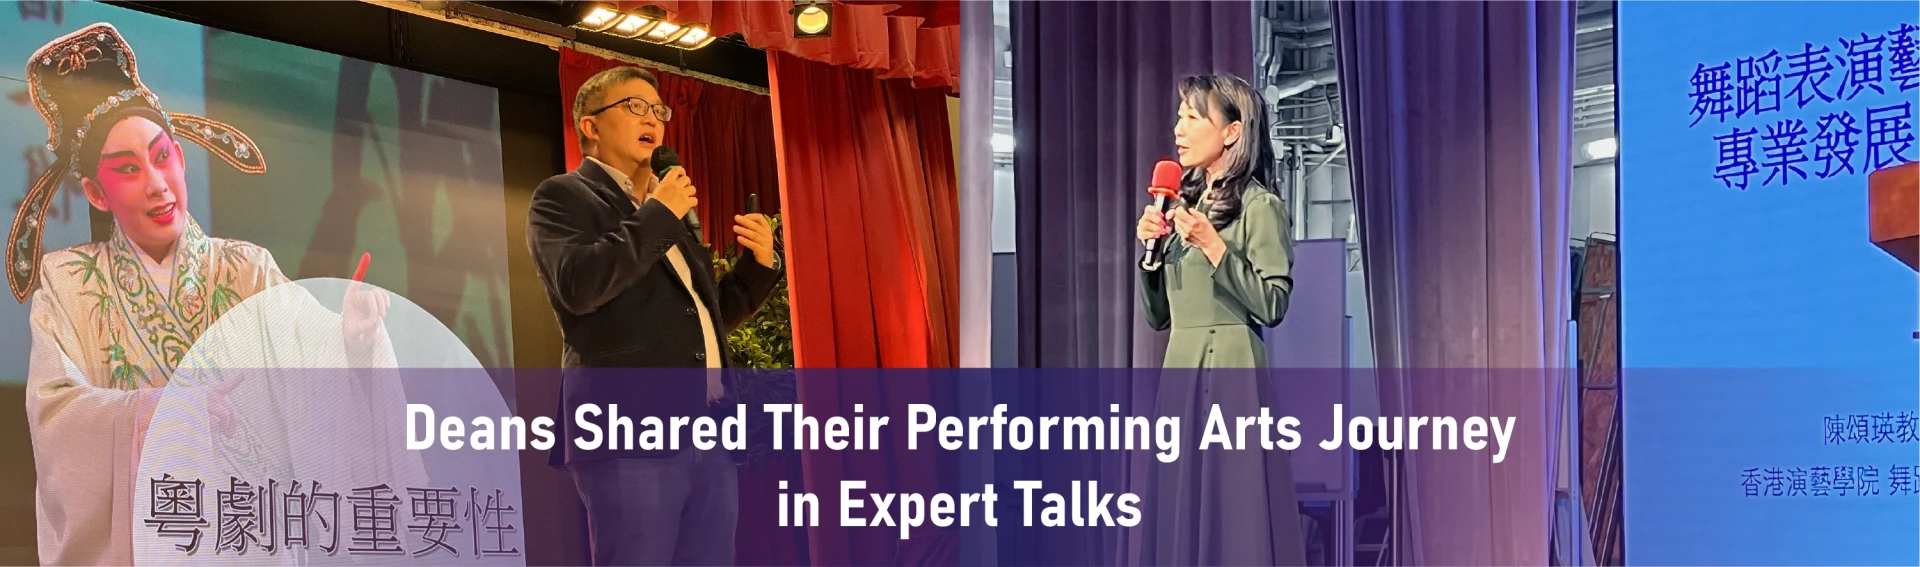 Deans Shared Their Performing Arts Journey in Expert Talks